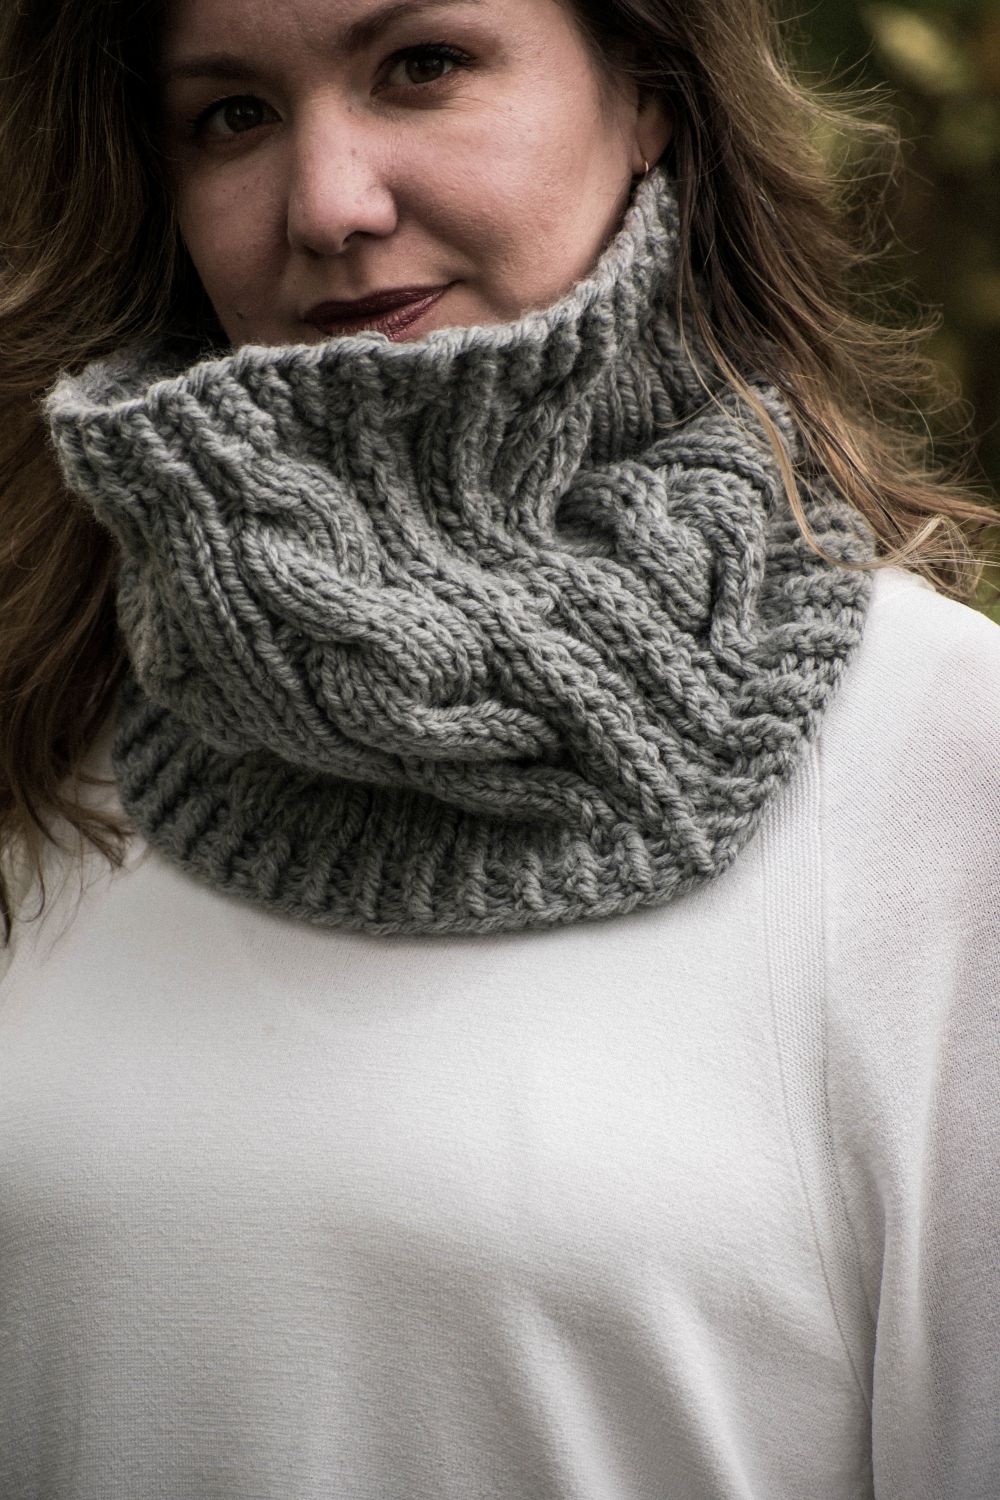 COWL KNITTING PATTERN: The Pleasant Valley Cowl